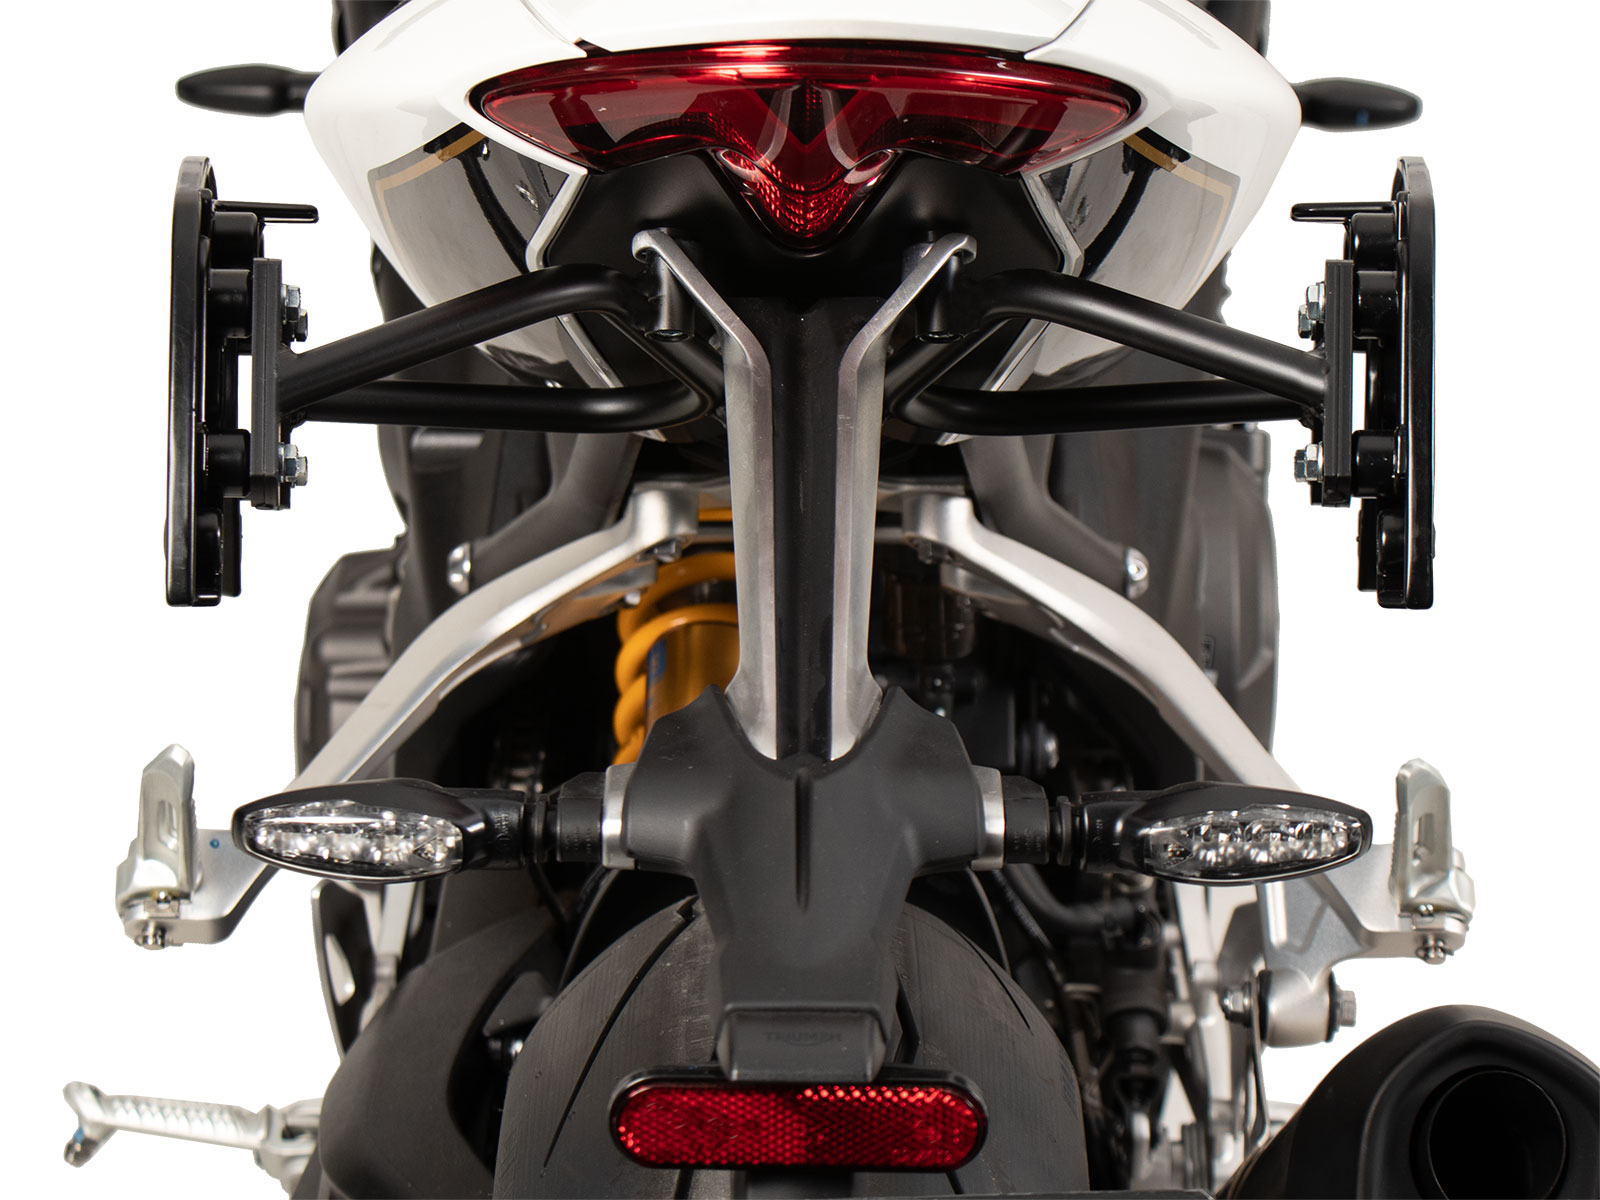 C-Bow sidecarrier for Triumph Speed Triple 1200 RS/RR (2021-)		